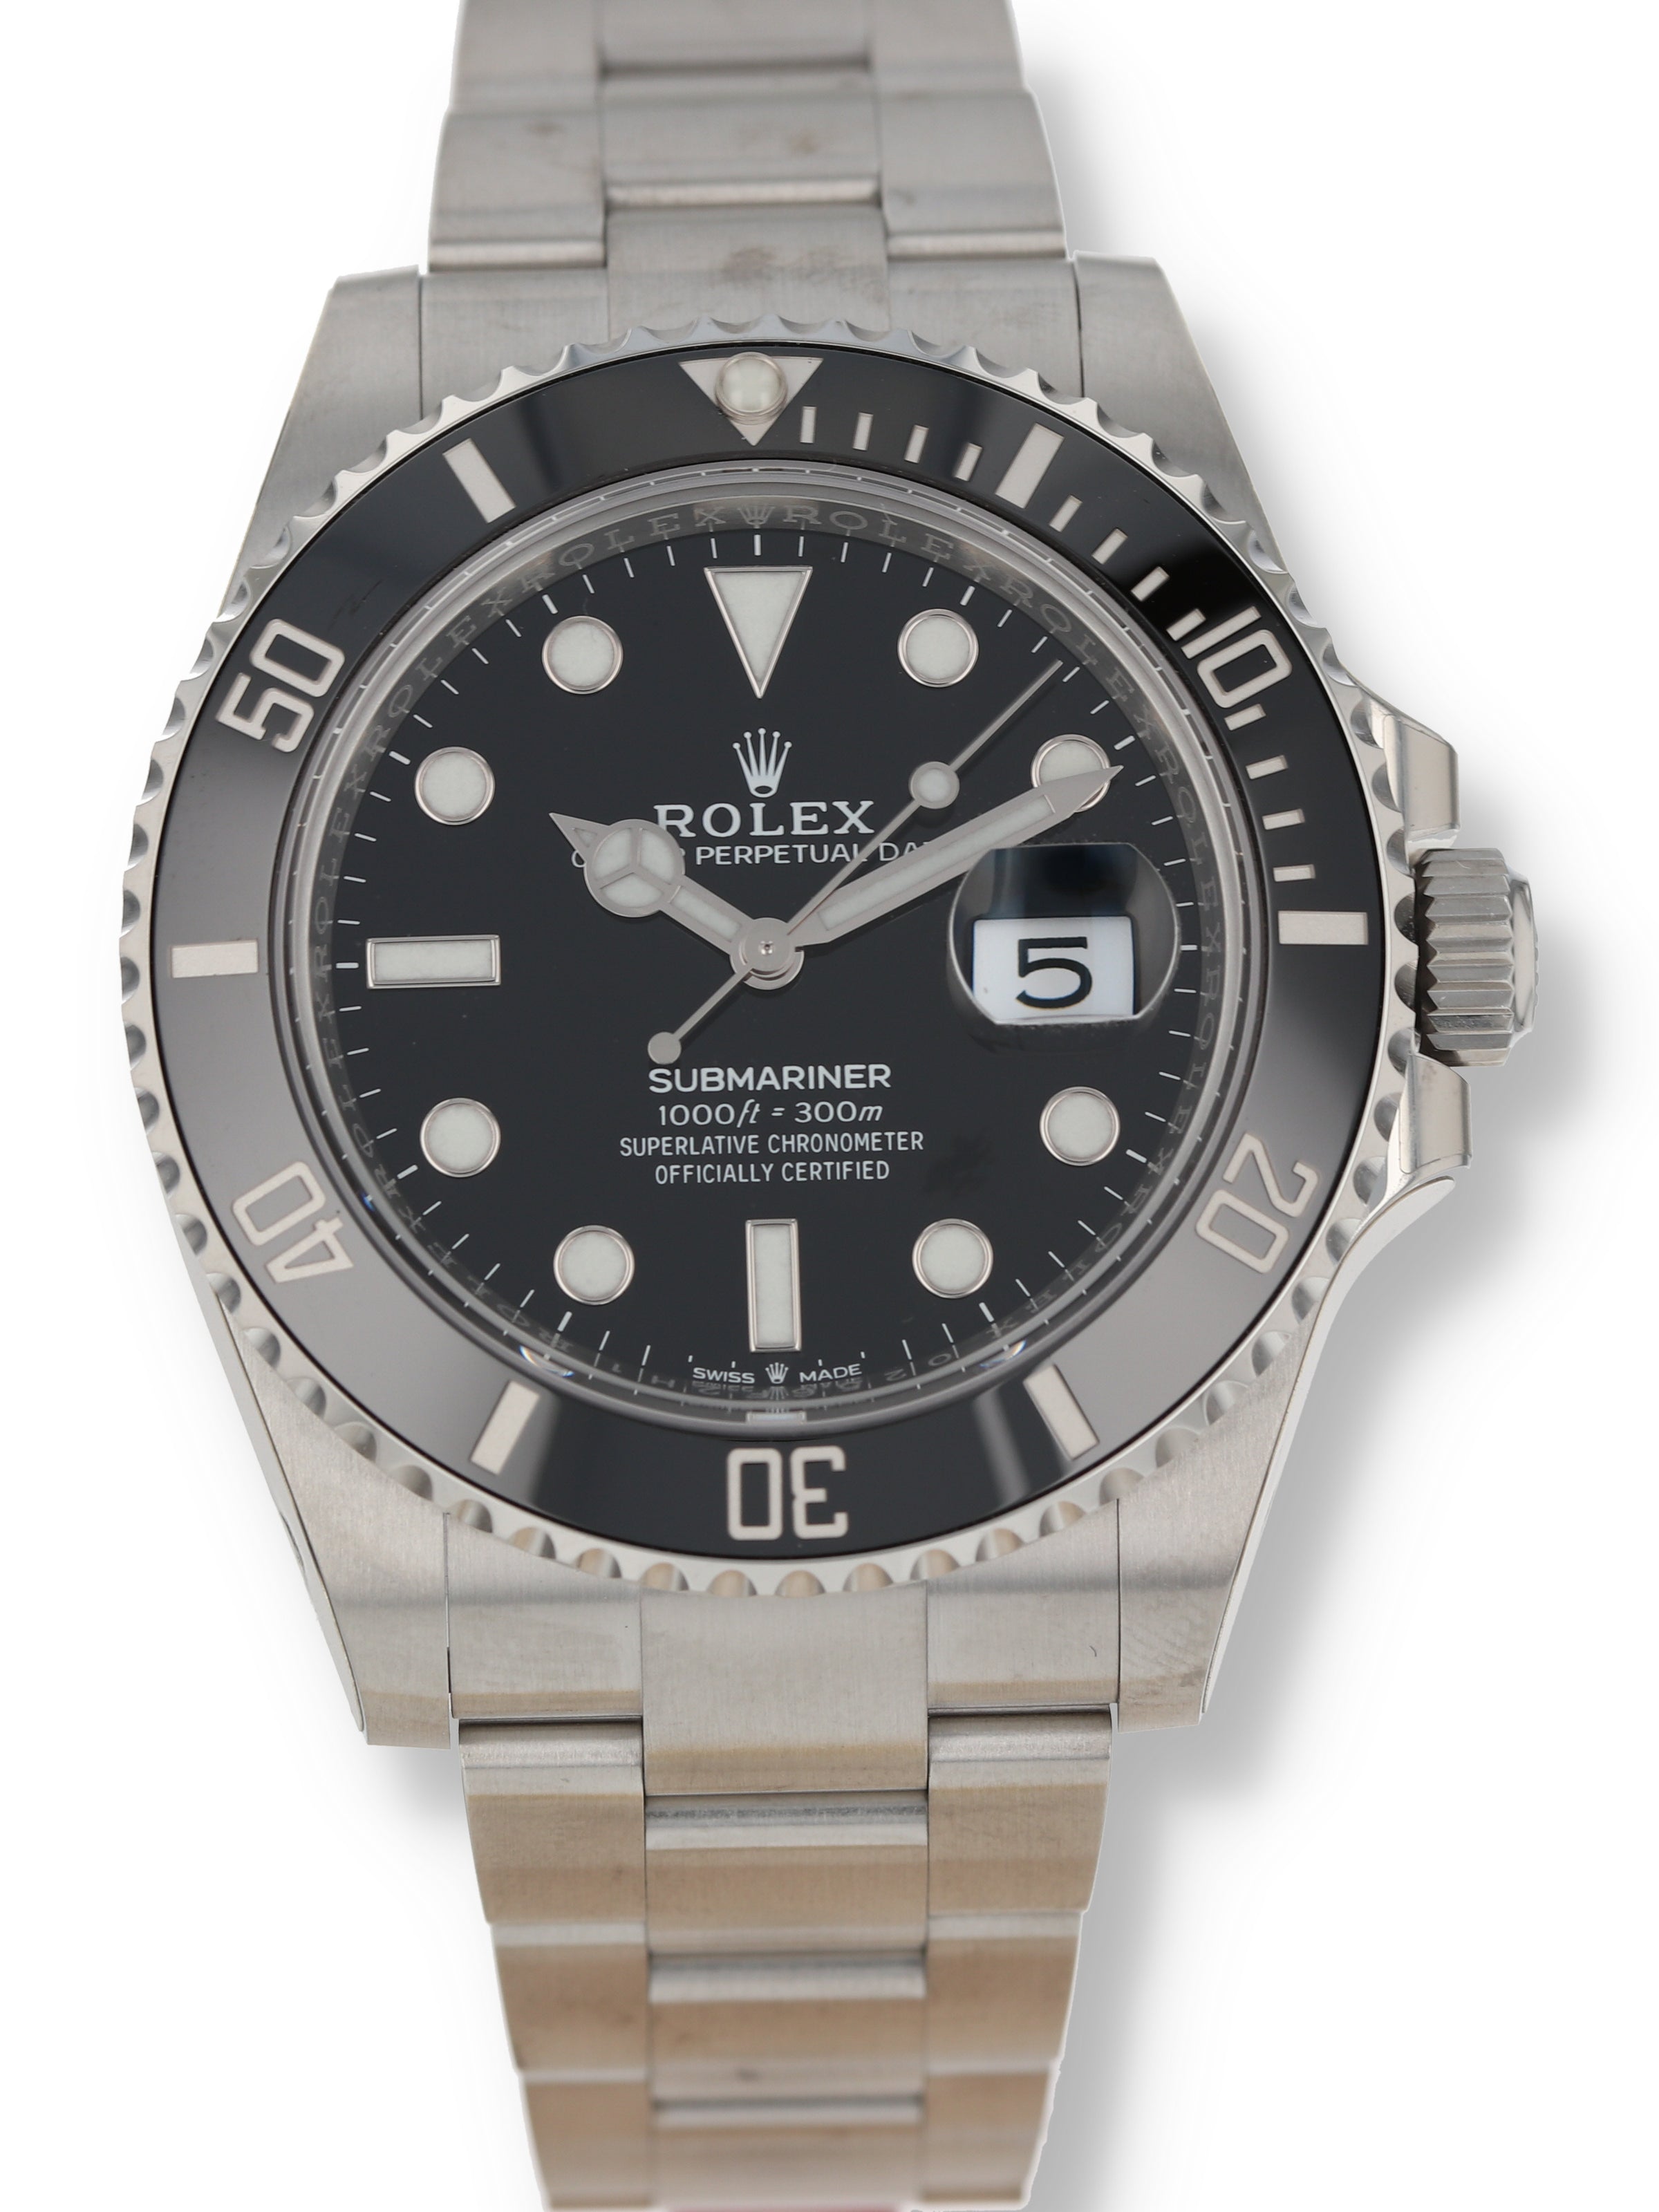 Finally arrived, 2022 Rolex Submariner Date 126610 LN